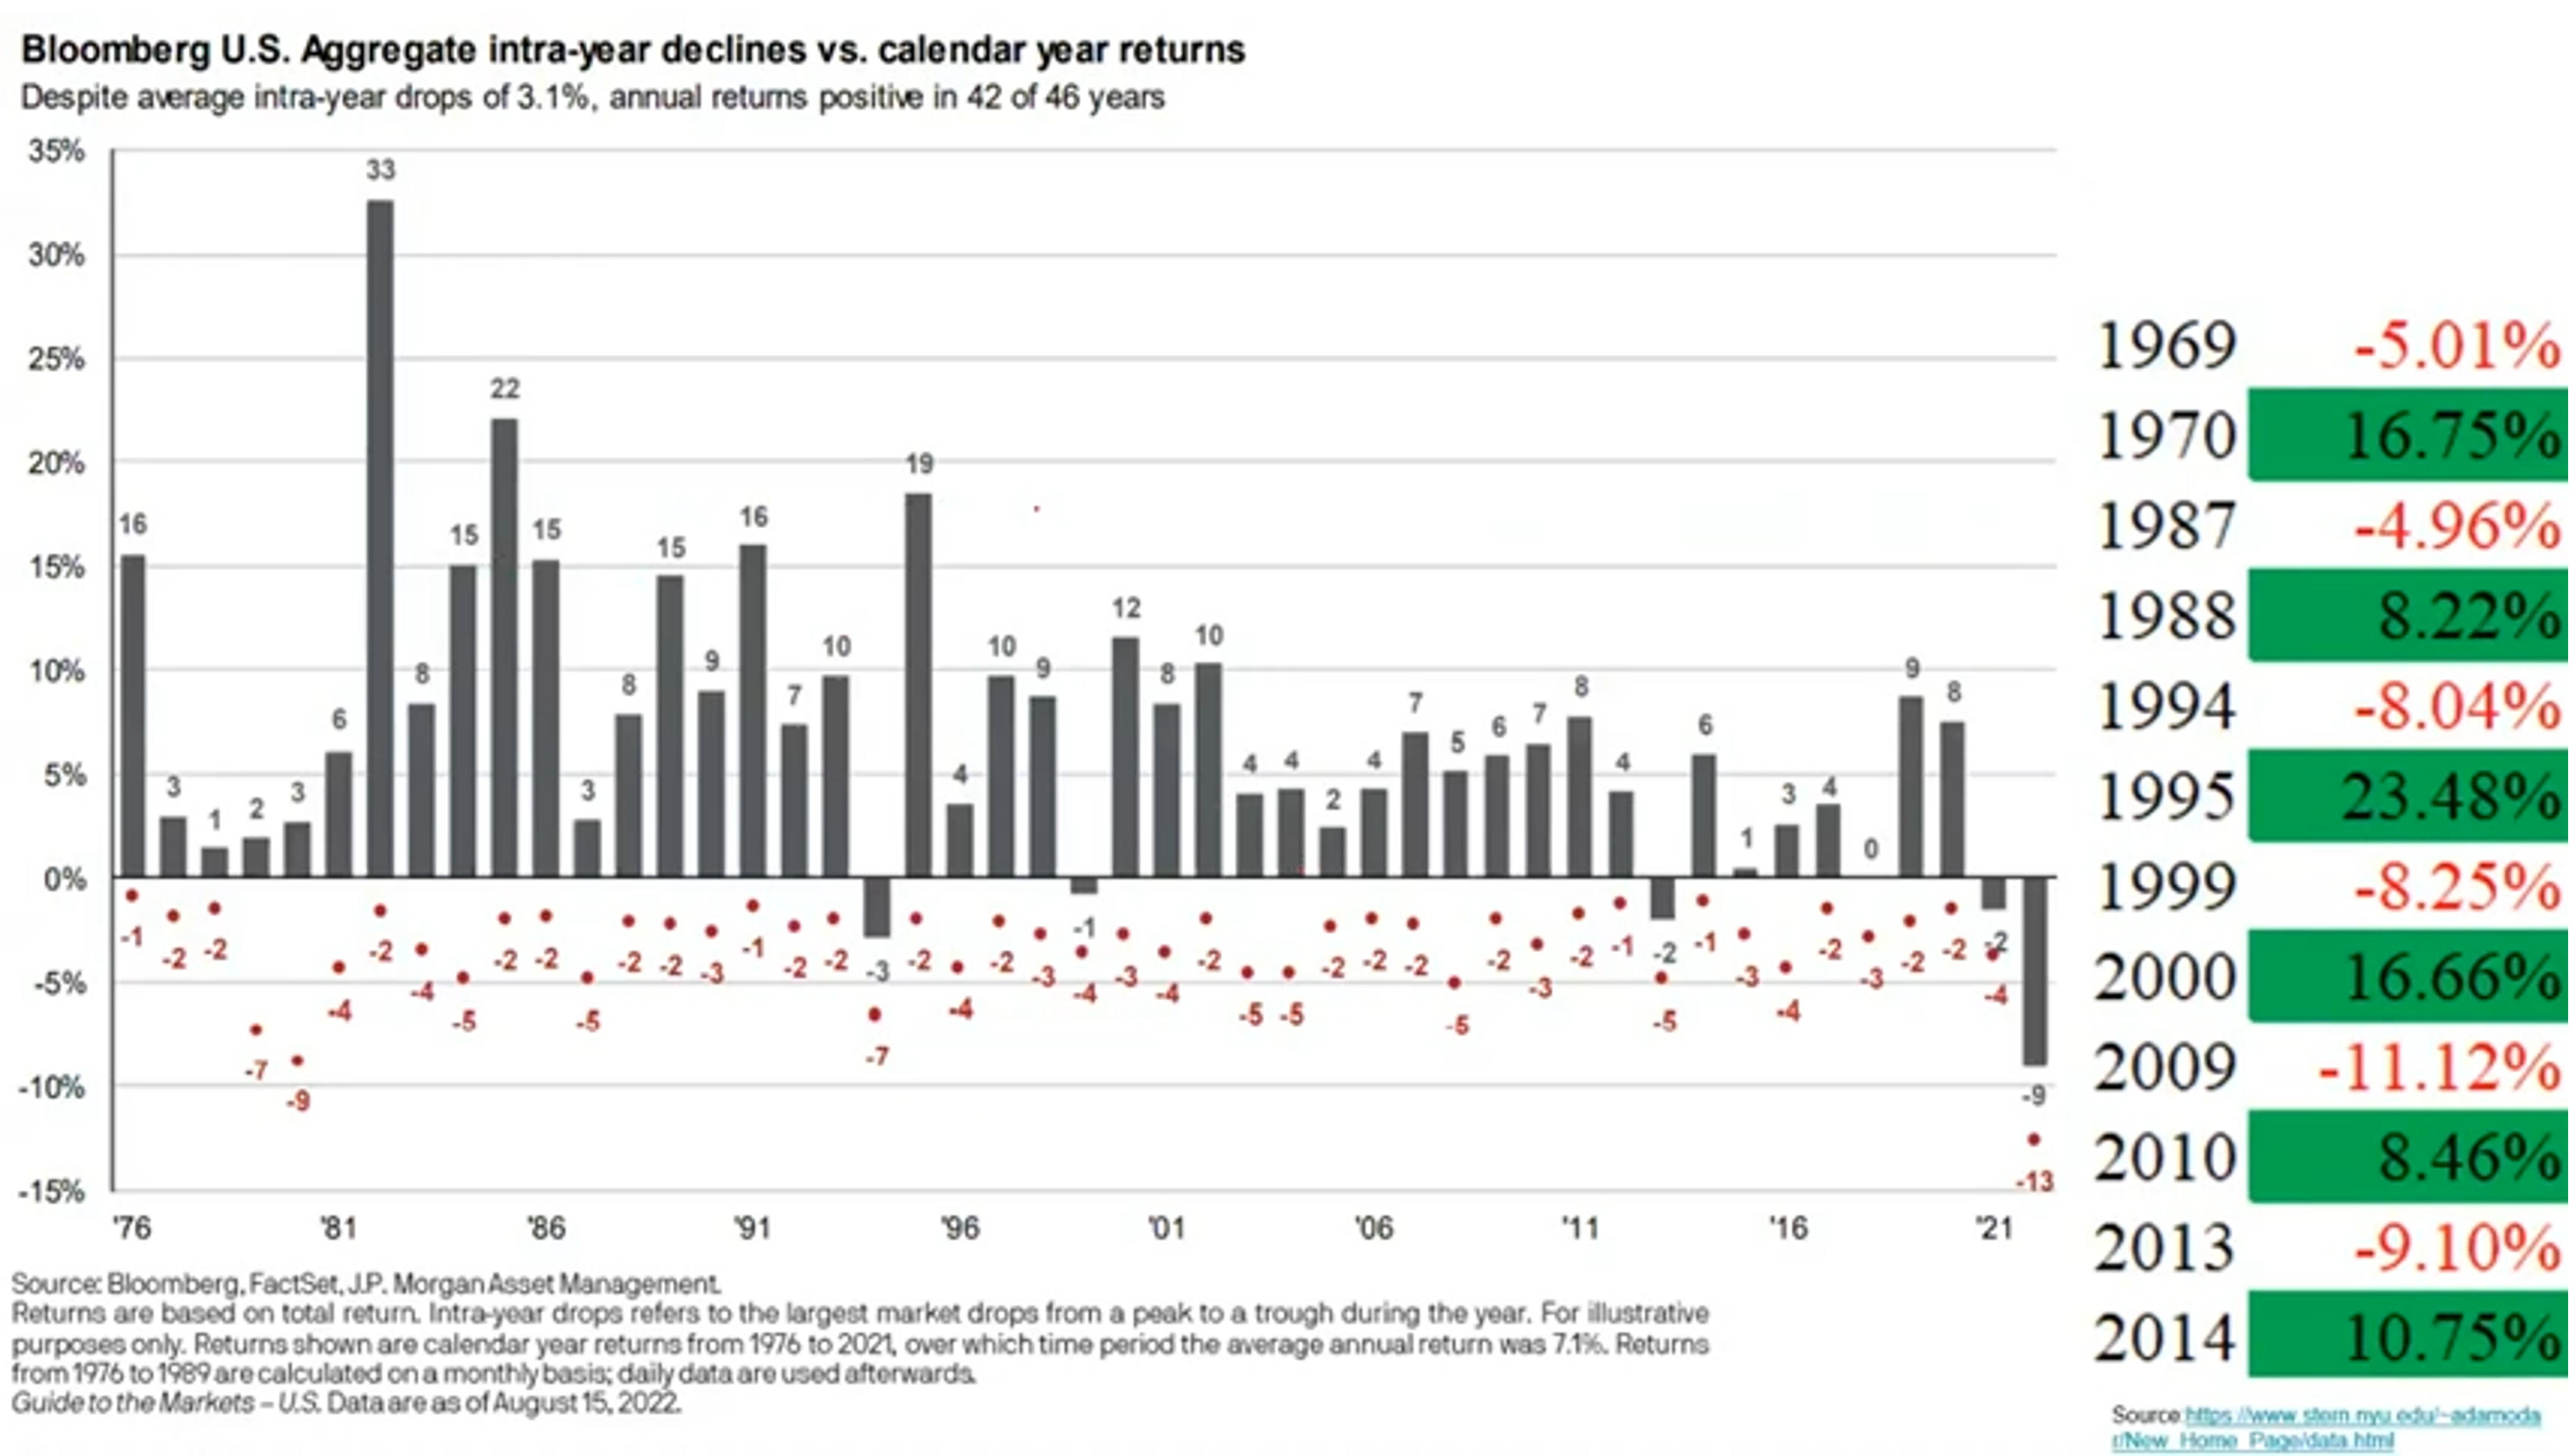 Bloomberg US Aggregate intra-year declines vs calendar year returns